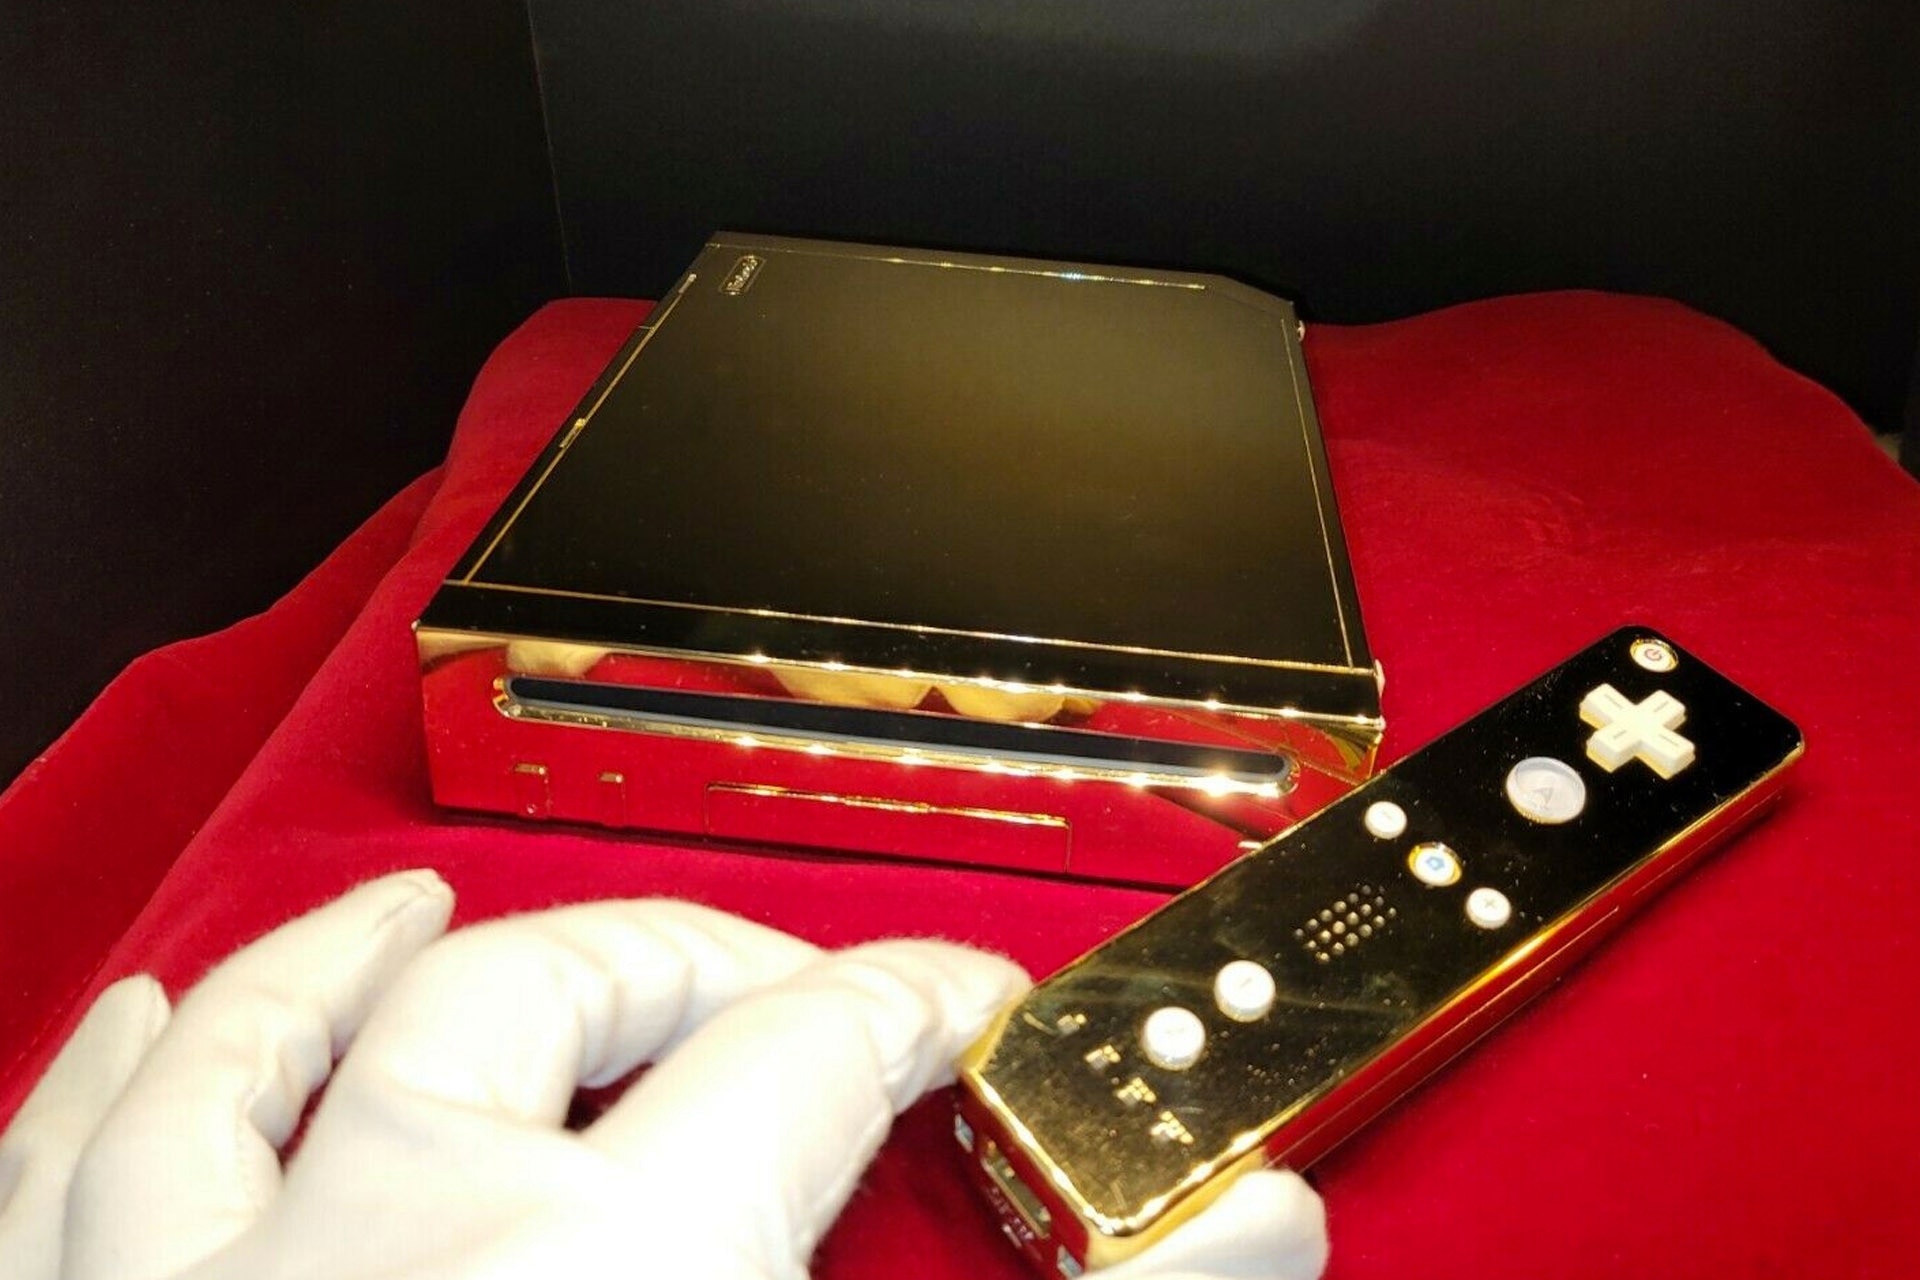 The 24k Gold Partly PlayStation PS5™ console